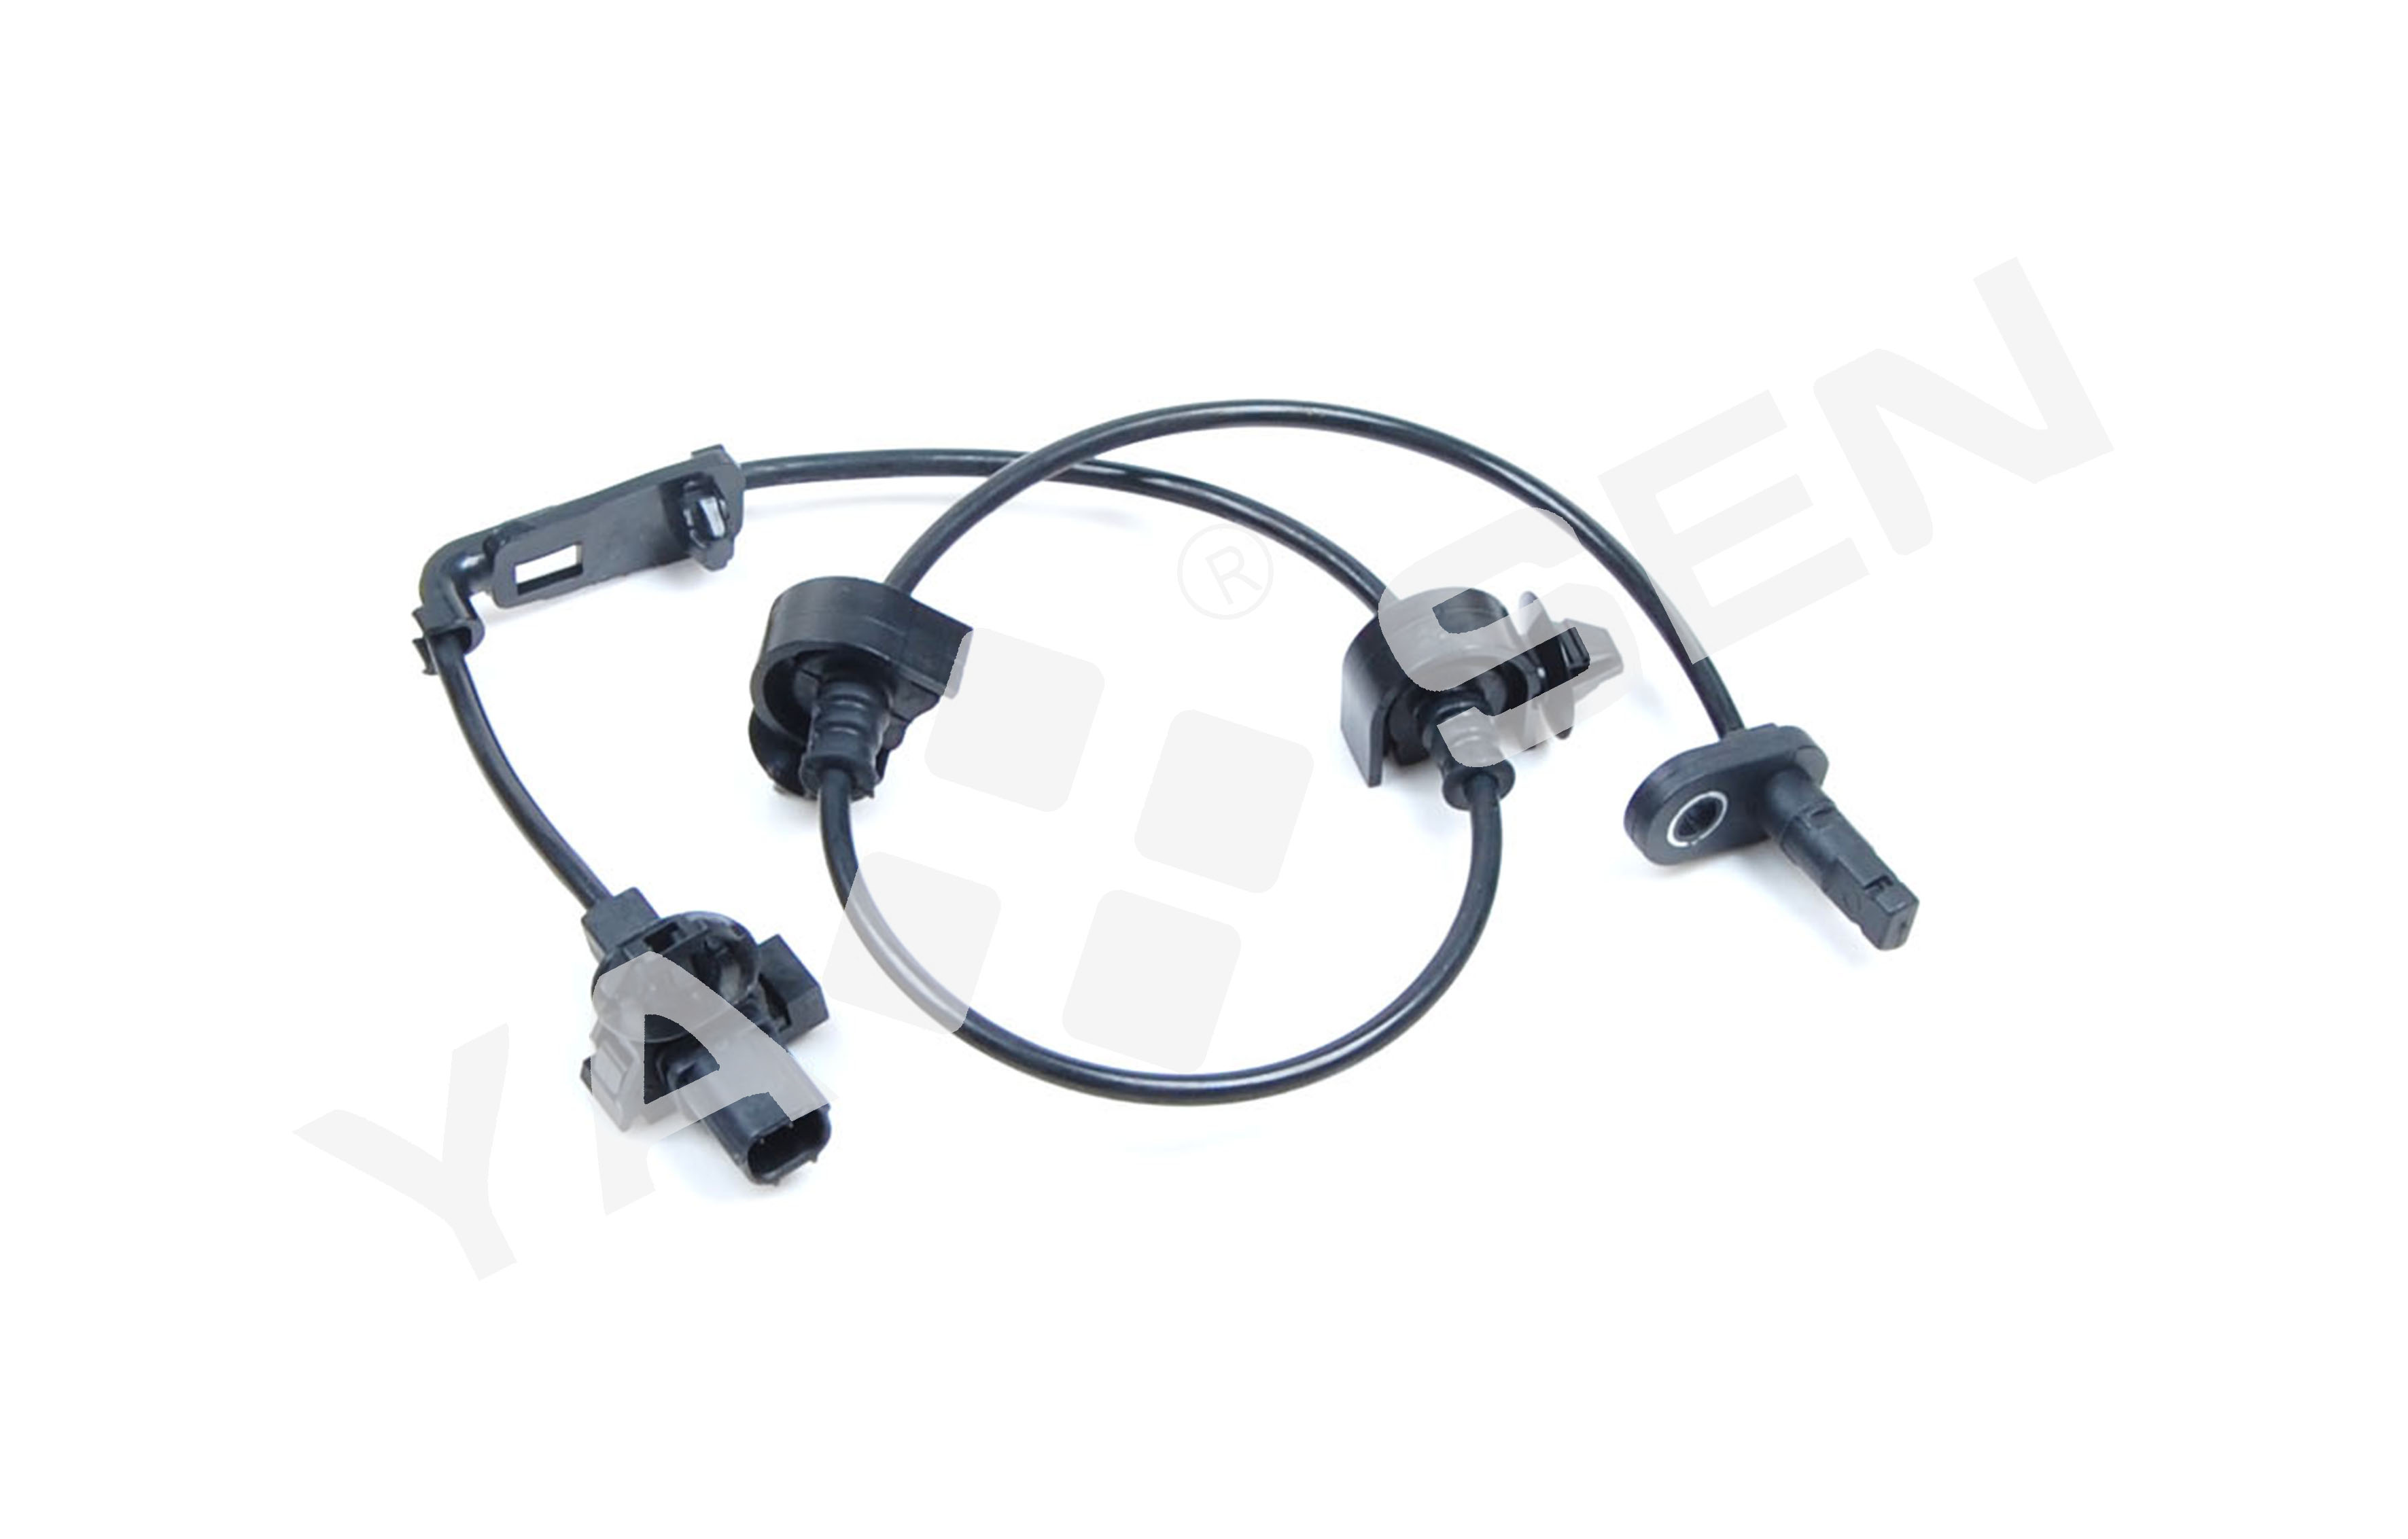 2022 Good Quality Ford Abs Sensor - ABS Wheel Speed Sensor for HONDA, 57455-SNA-A01 ALS1100 5S7548 57455-SNA-003 57455-SNA-A01 57455-SNA-A03 5S7548 SU9037 – YASEN